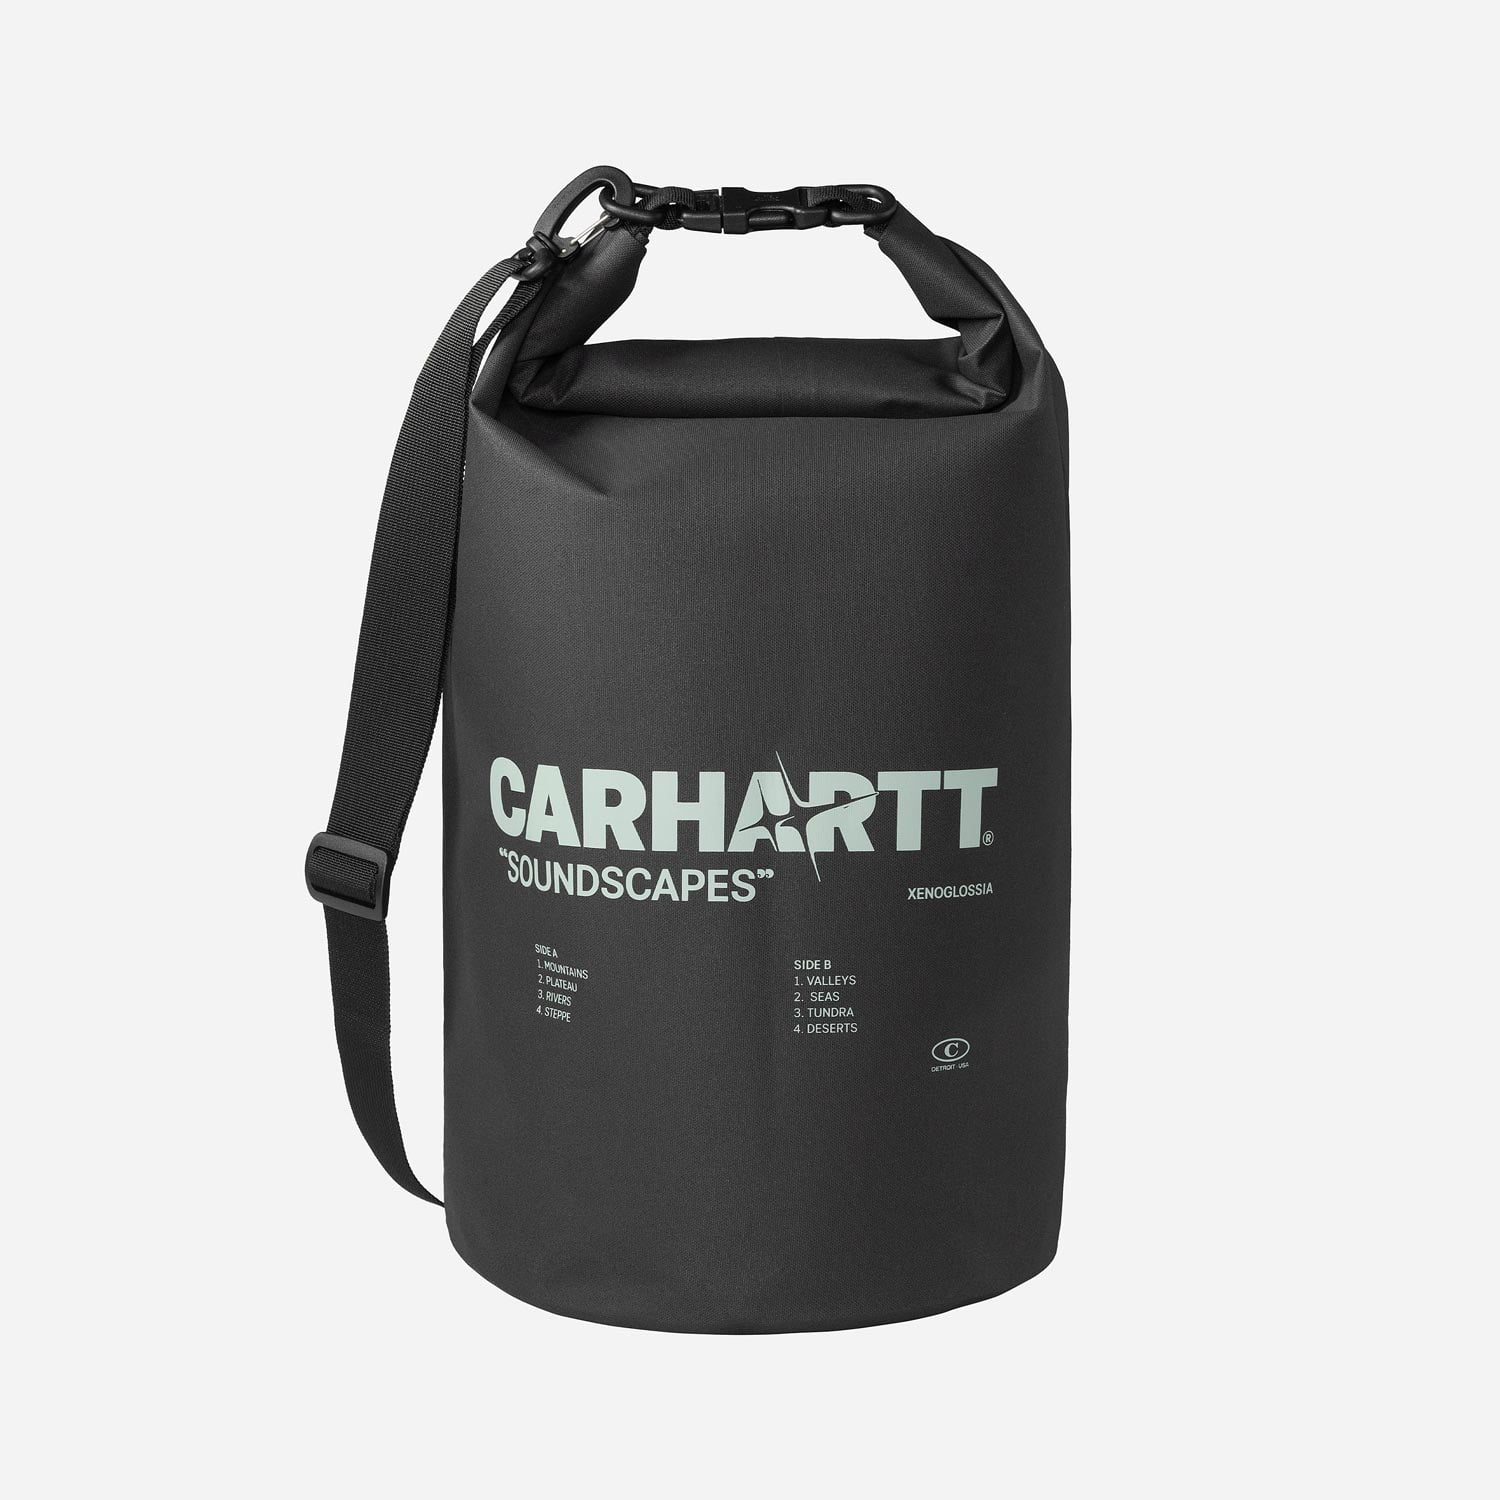 Carhartt WIP Soundscapes Dry Bag - Black/Yucca